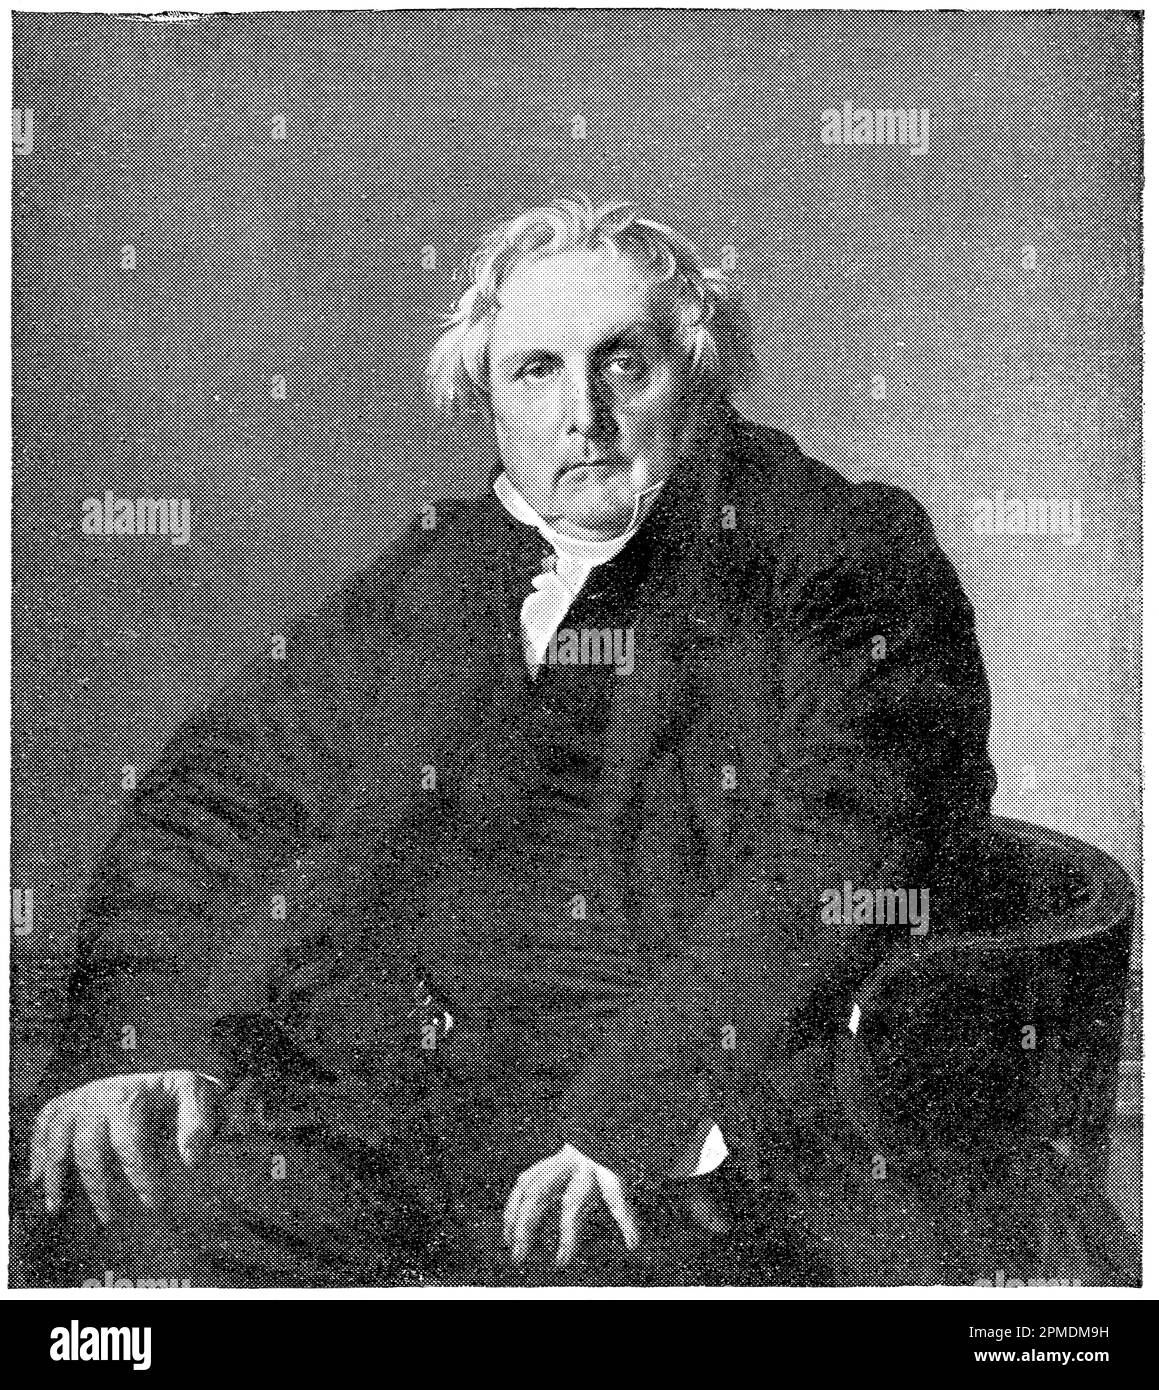 Portrait of Monsieur Bertin by a French Neoclassical painter Jean-Auguste-Dominique Ingres. Publication of the book 'Meyers Konversations-Lexikon', Volume 2, Leipzig, Germany, 1910 Stock Photo